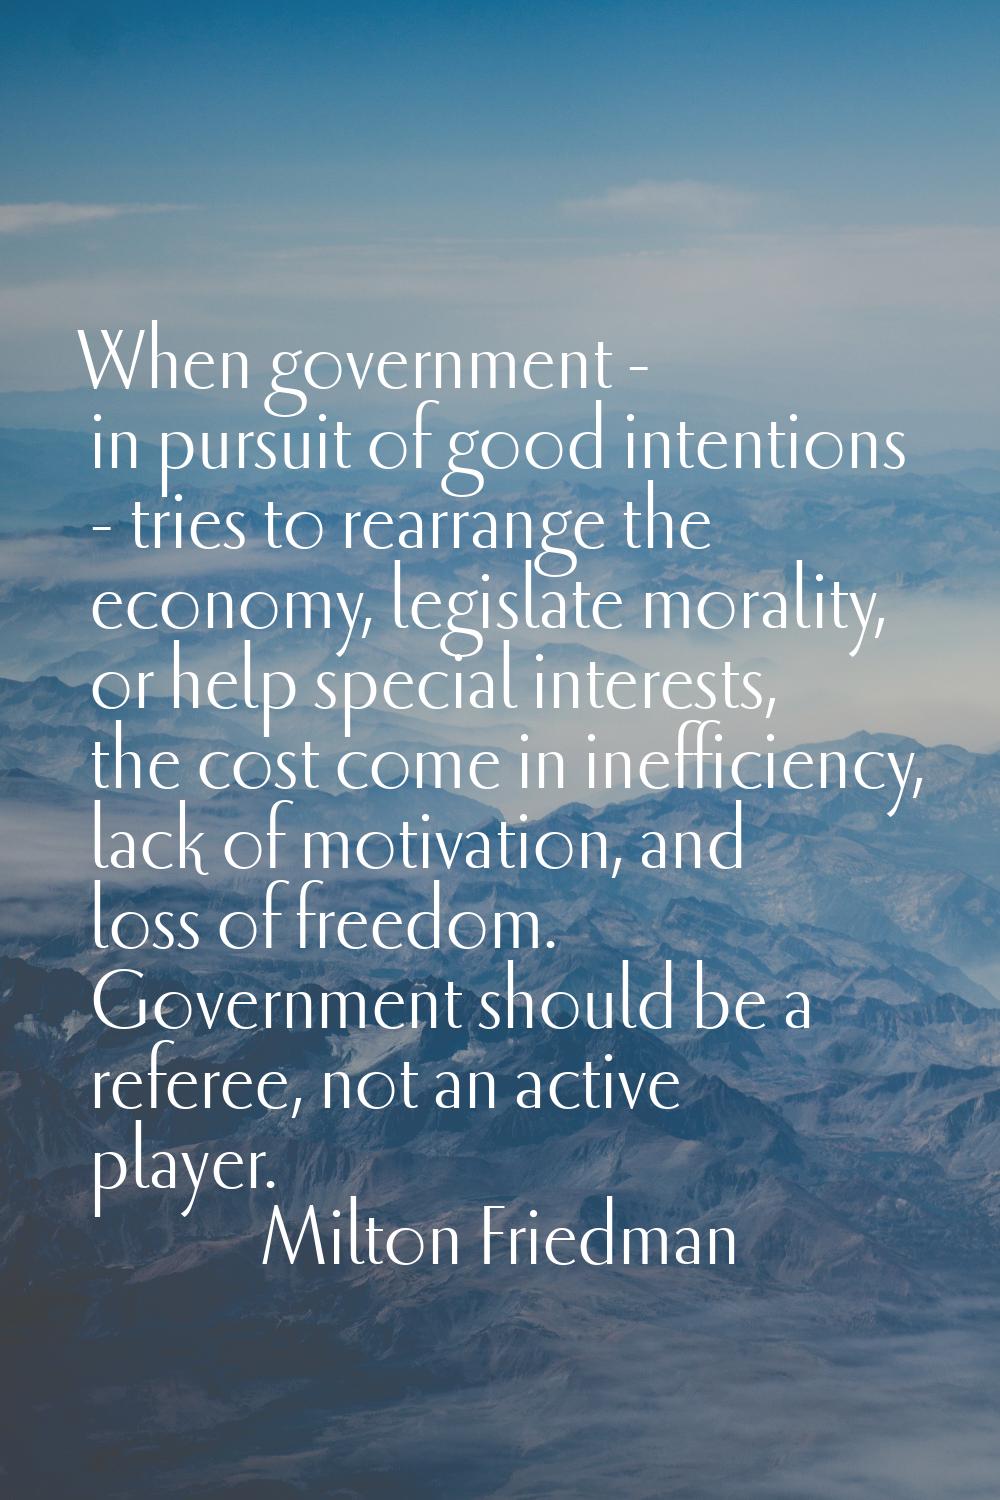 When government - in pursuit of good intentions - tries to rearrange the economy, legislate moralit